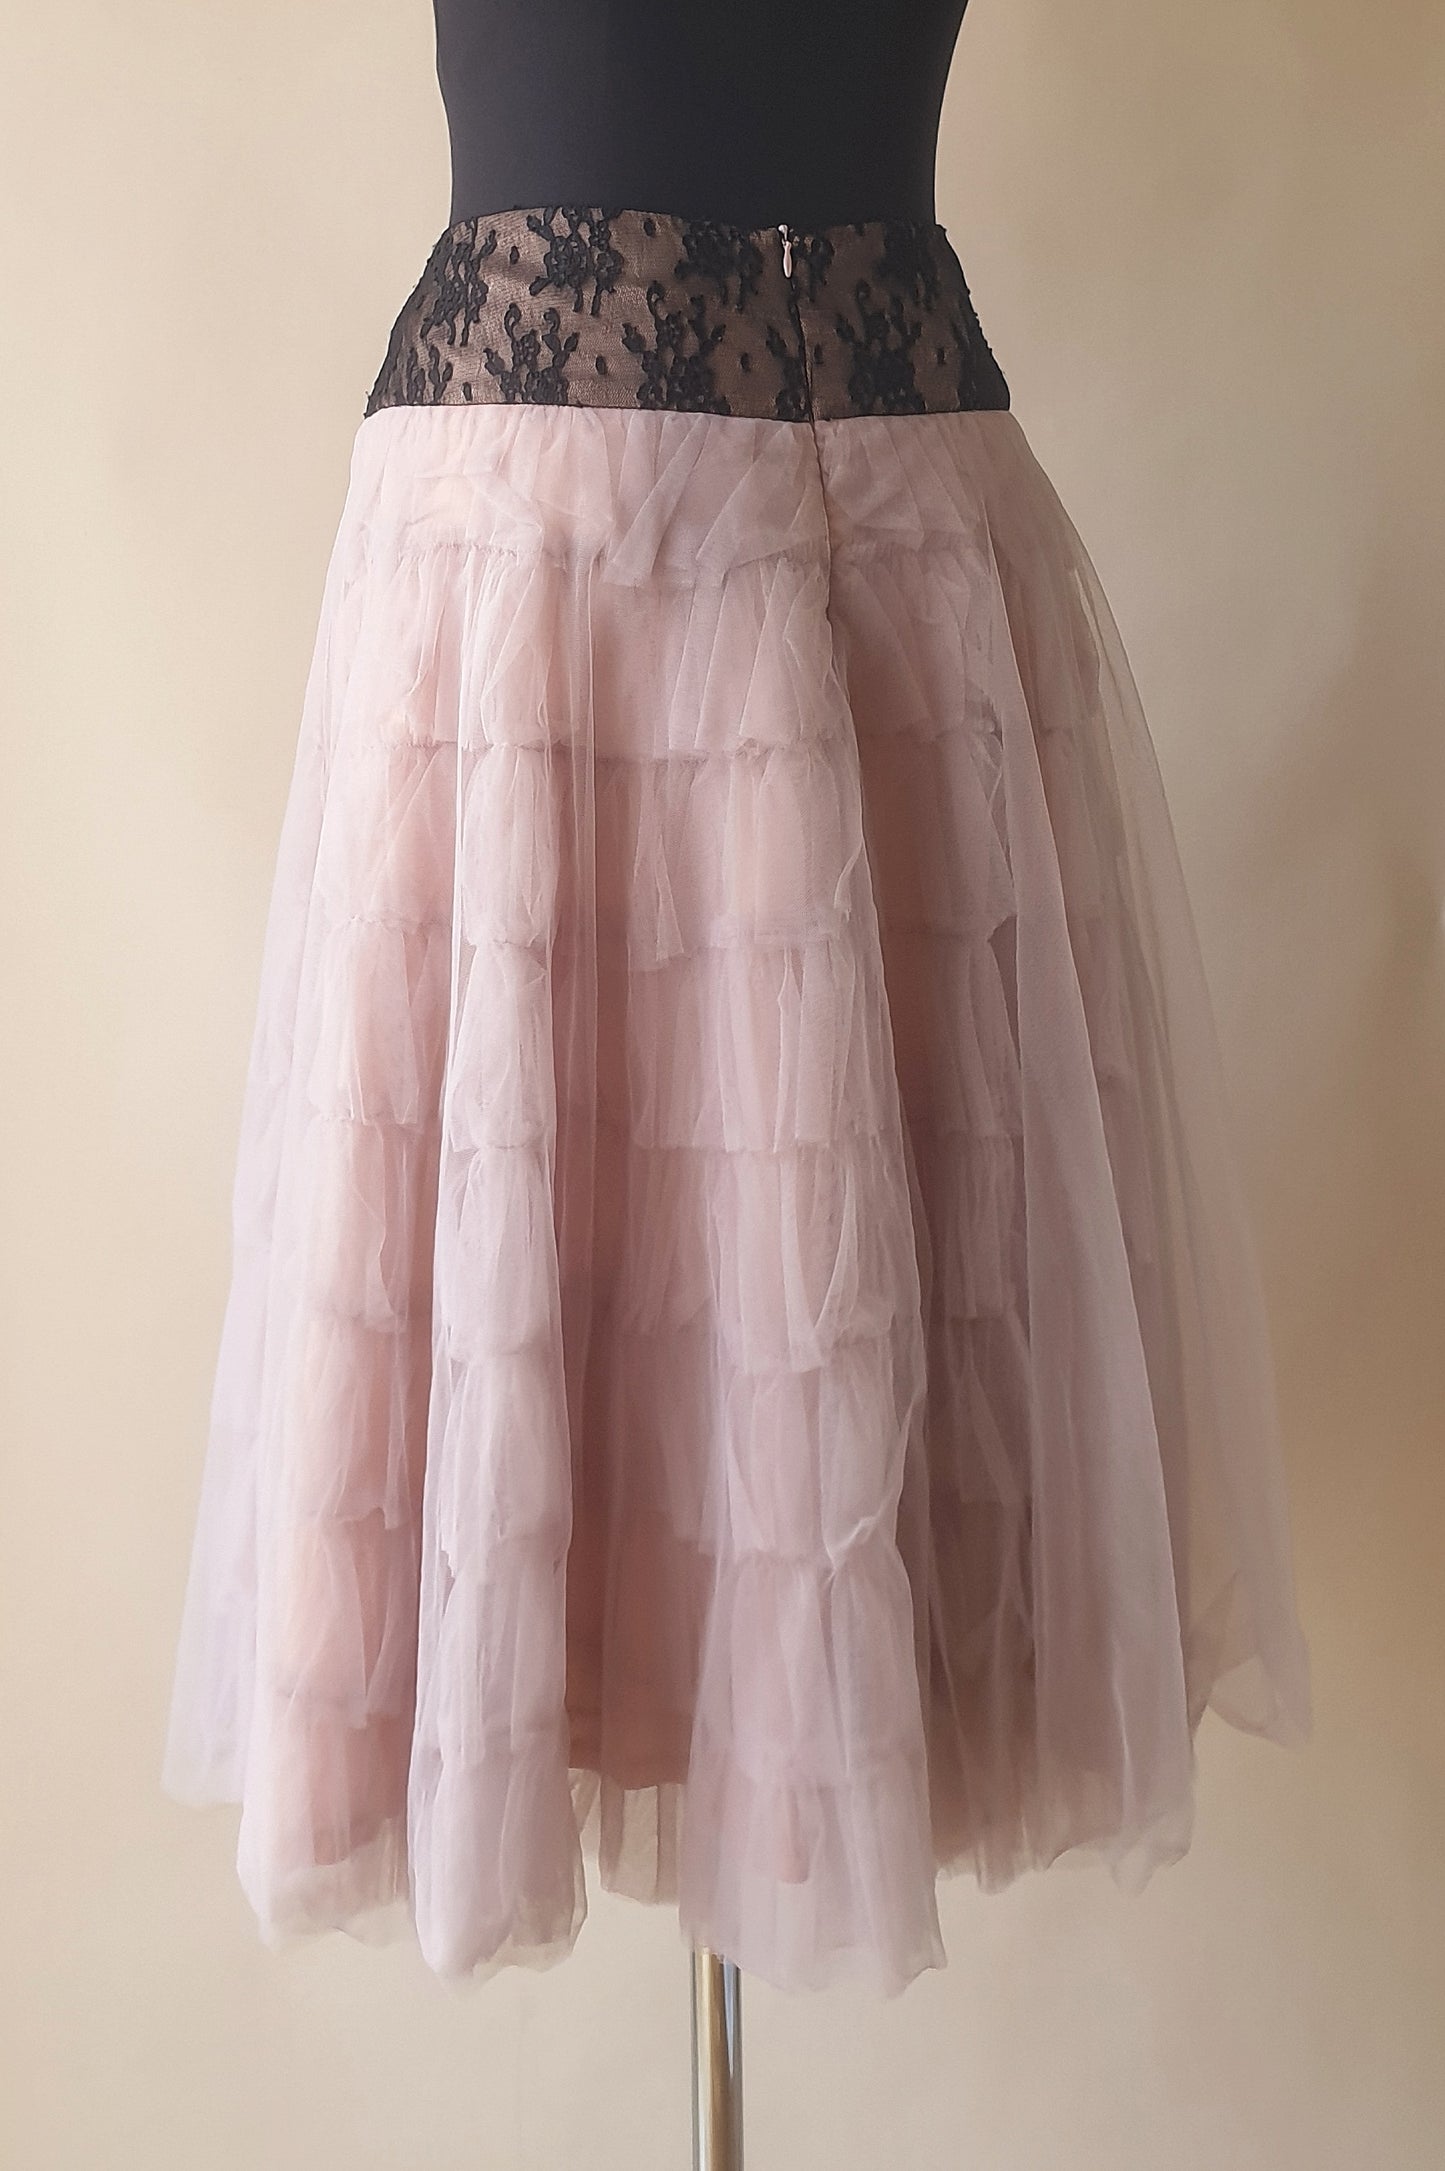 Stunning tulle skirt by Trelise Cooper Size L